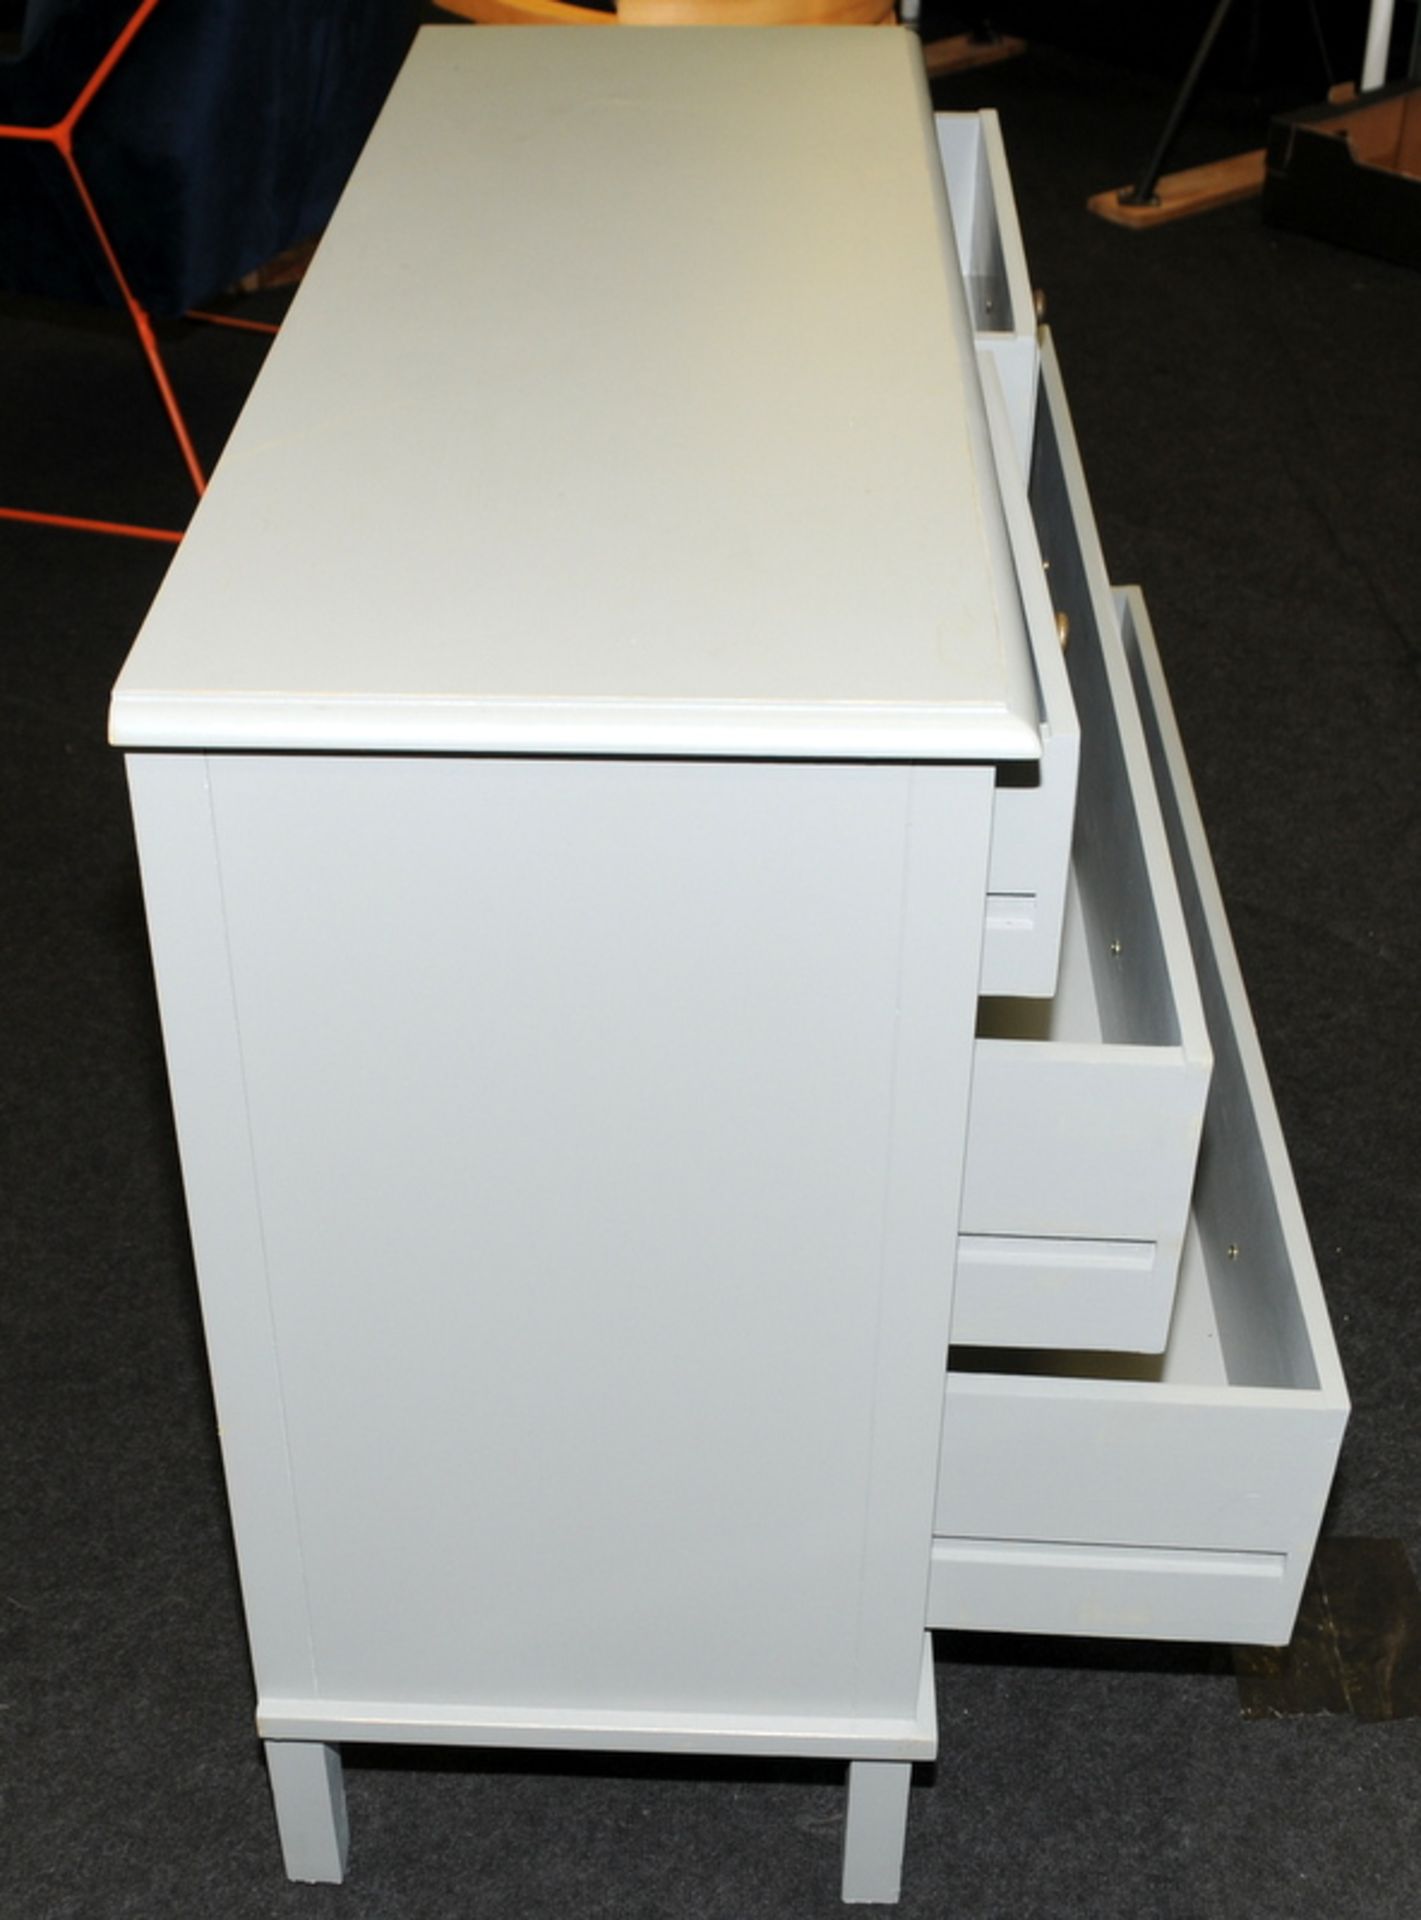 Narrow 2 over 2 narrow chest of drawers or dresser in matt grey finish with a little deliberate - Image 3 of 5